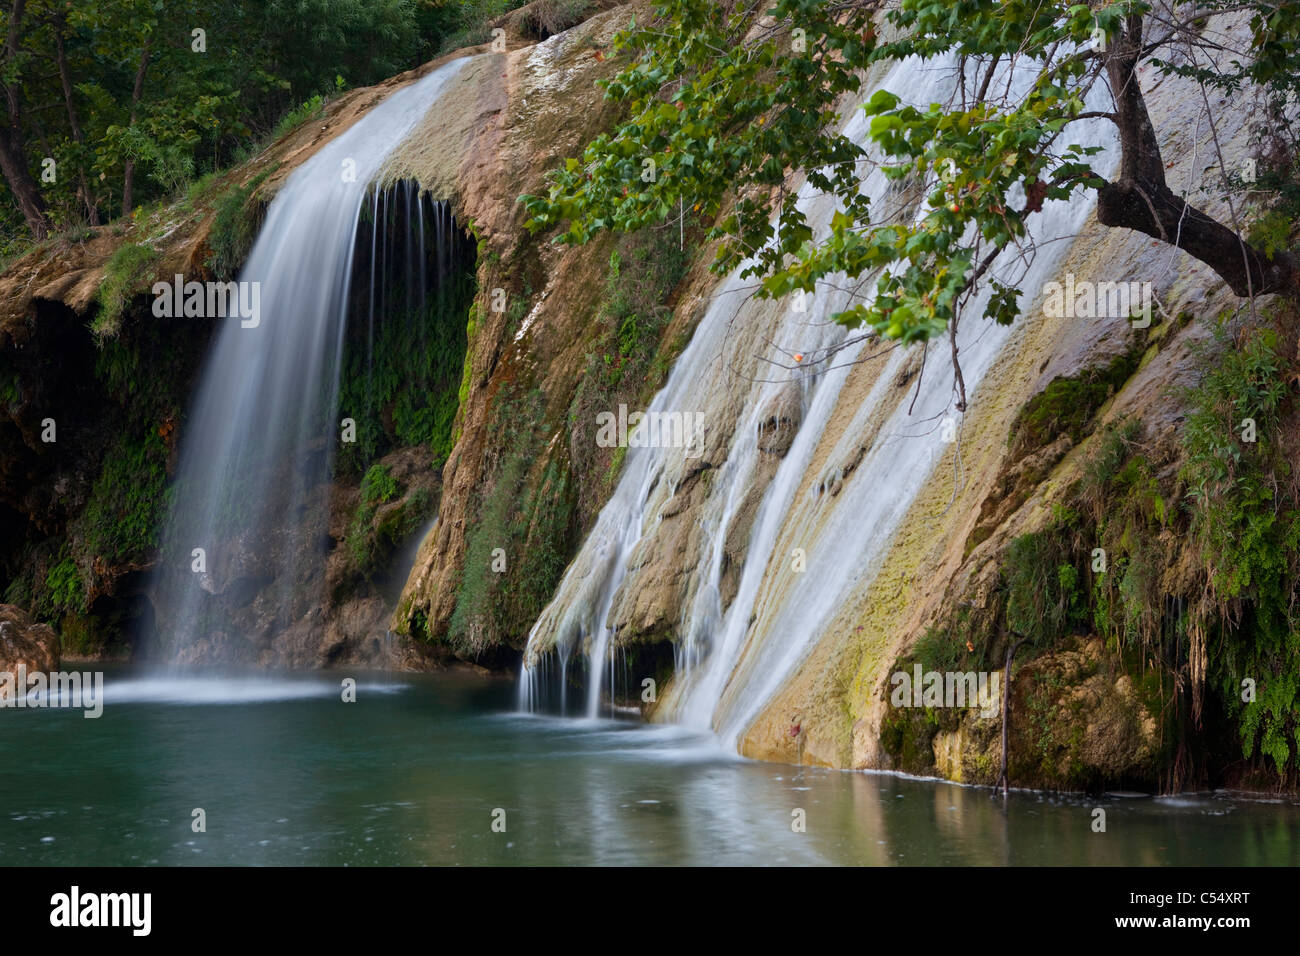 Waterfall in a forest, Turner Falls, Arbuckle Mountains, Oklahoma, USA Stock Photo